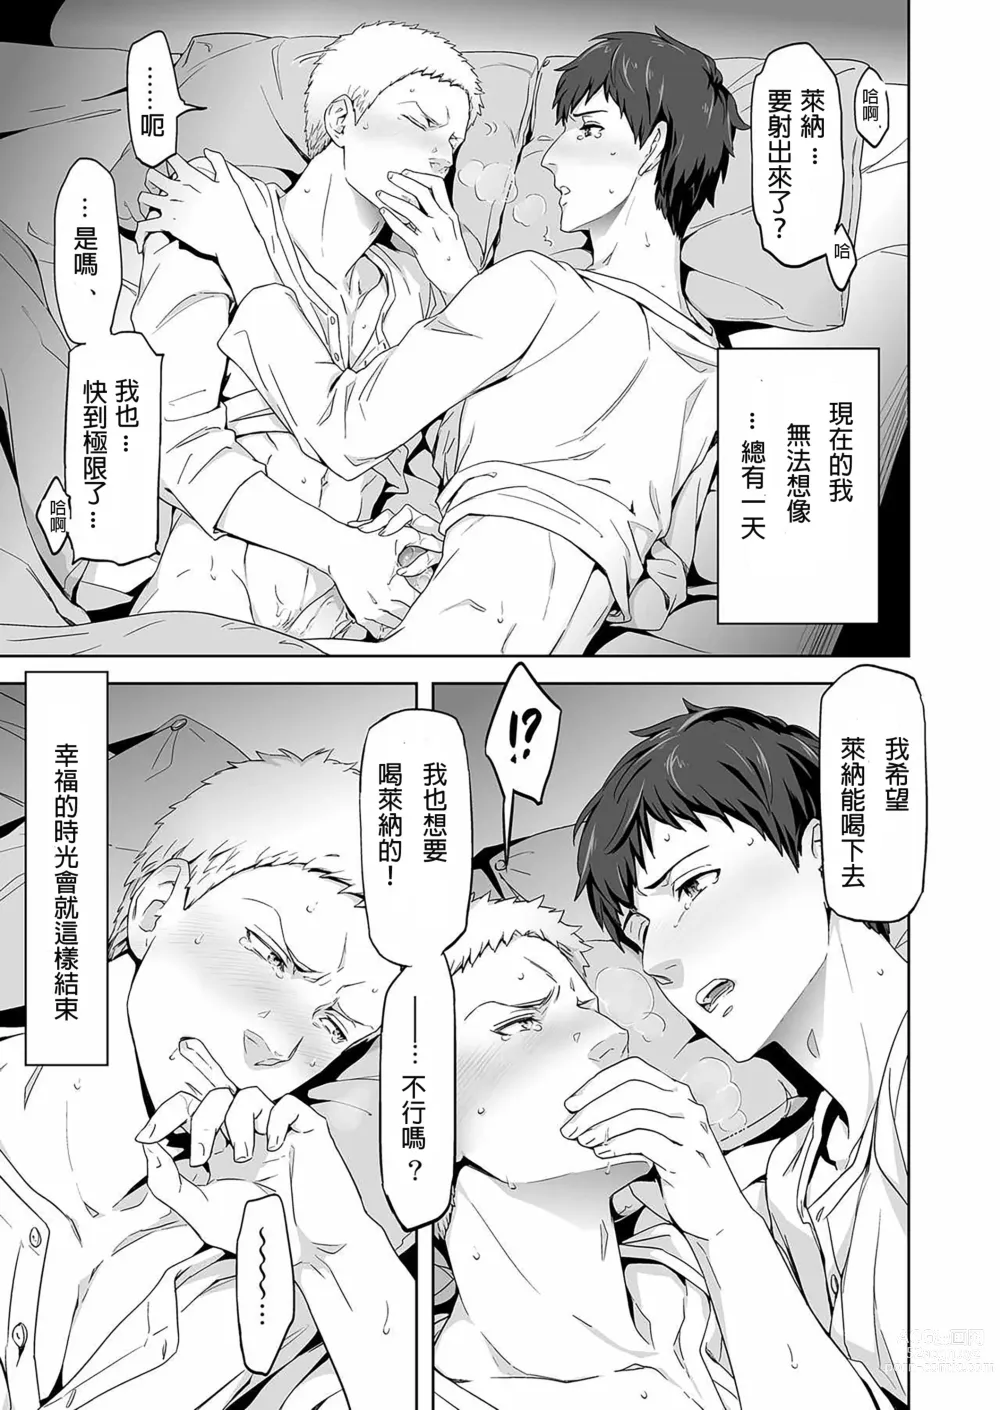 Page 26 of doujinshi We are the Massacre